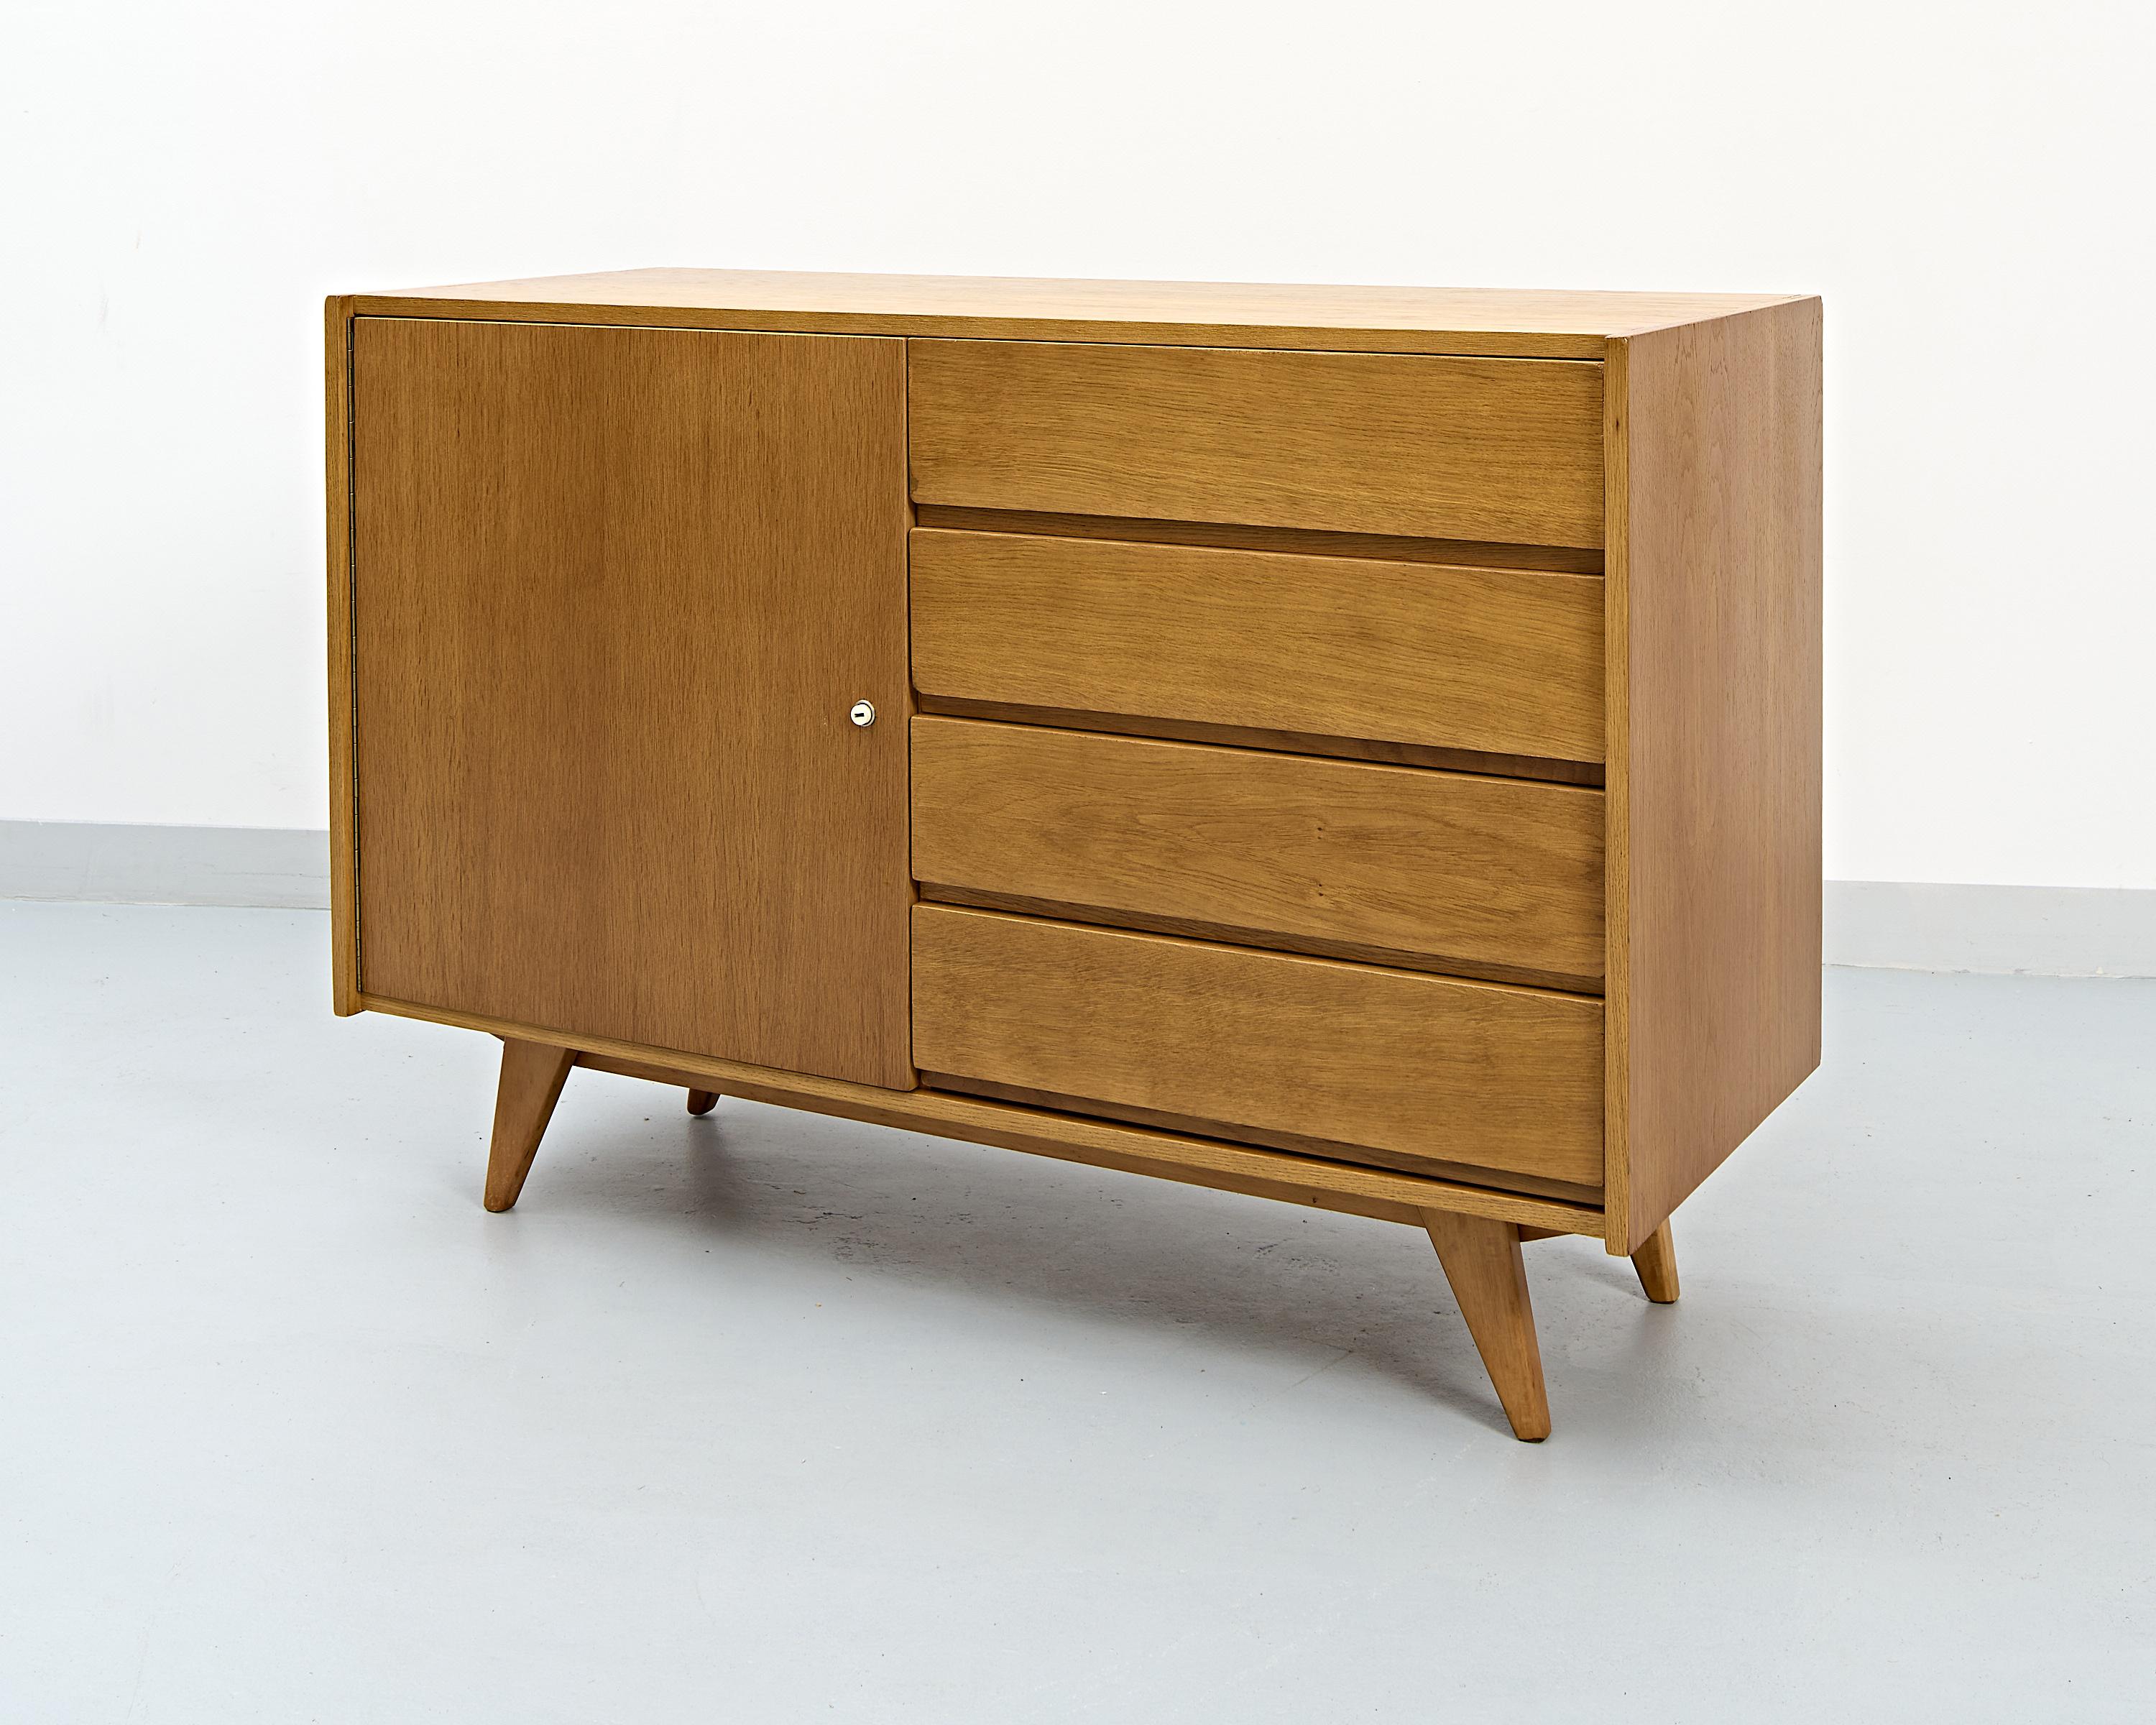 U-458 Sideboard by Jiri Jiroutek for Interior Prague, 1960s In Good Condition For Sale In Poznań, PL